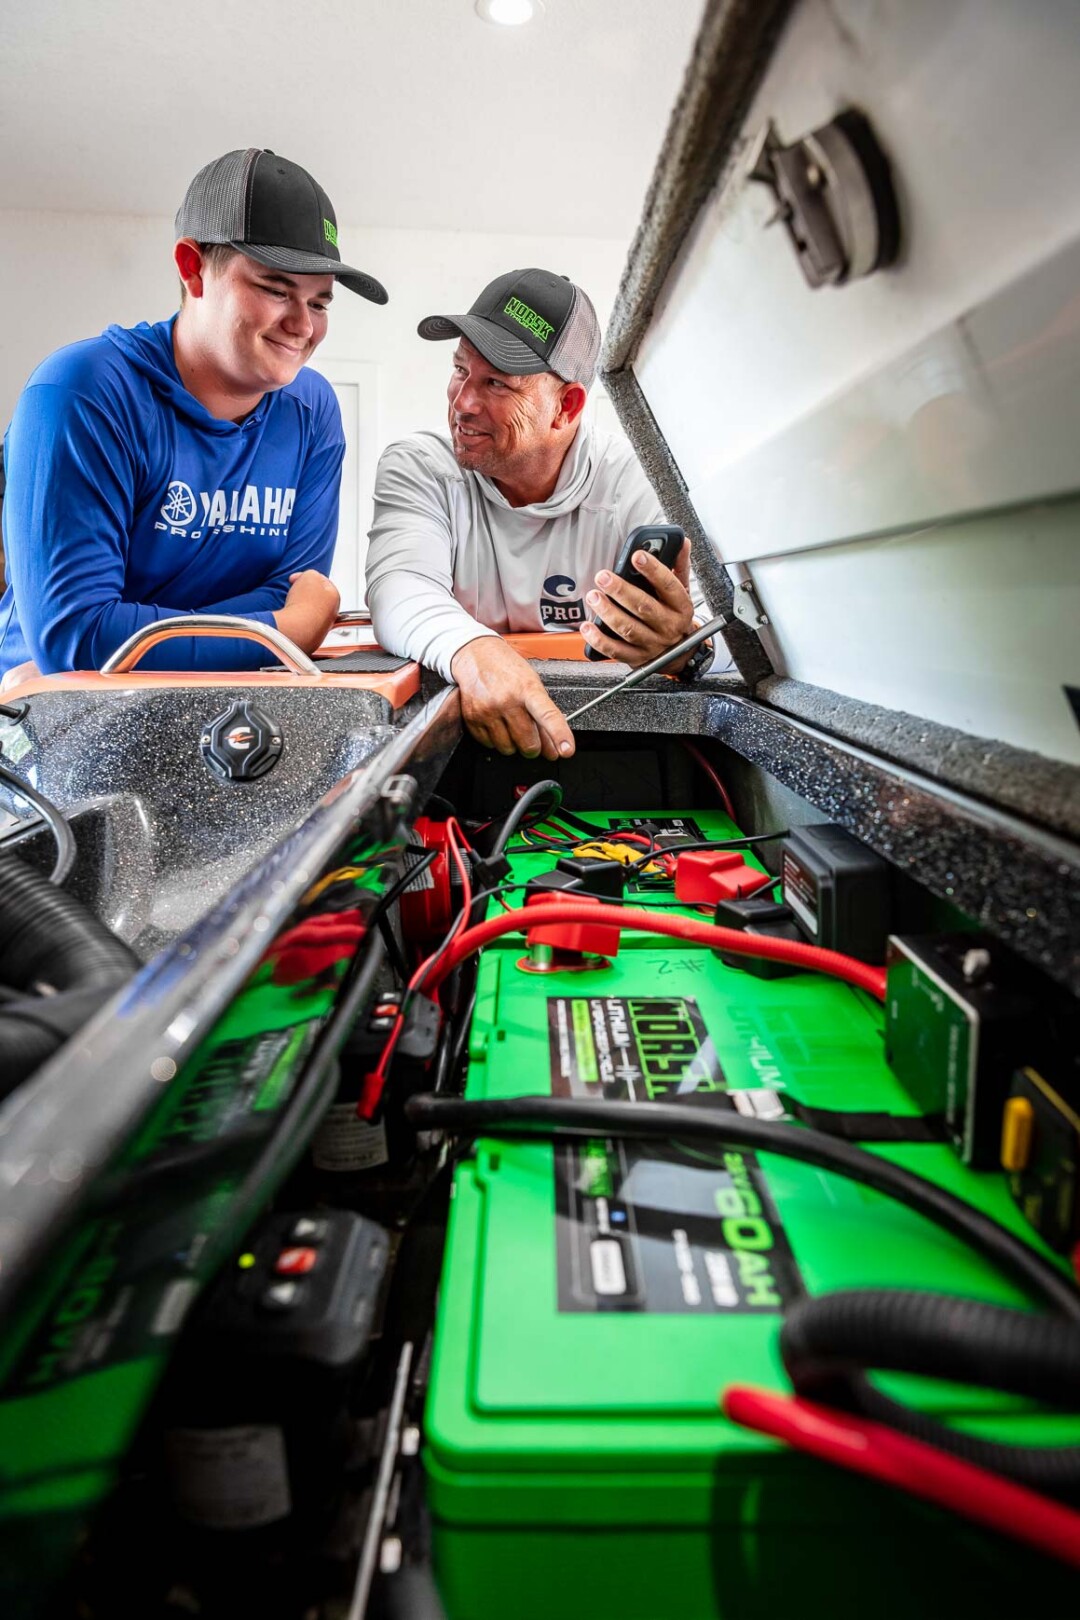 Bobby Lane Checking his two Norsk Lithium 36V 60Ah Batteries using Norsk Guardian Mobile app with his son 010A6903